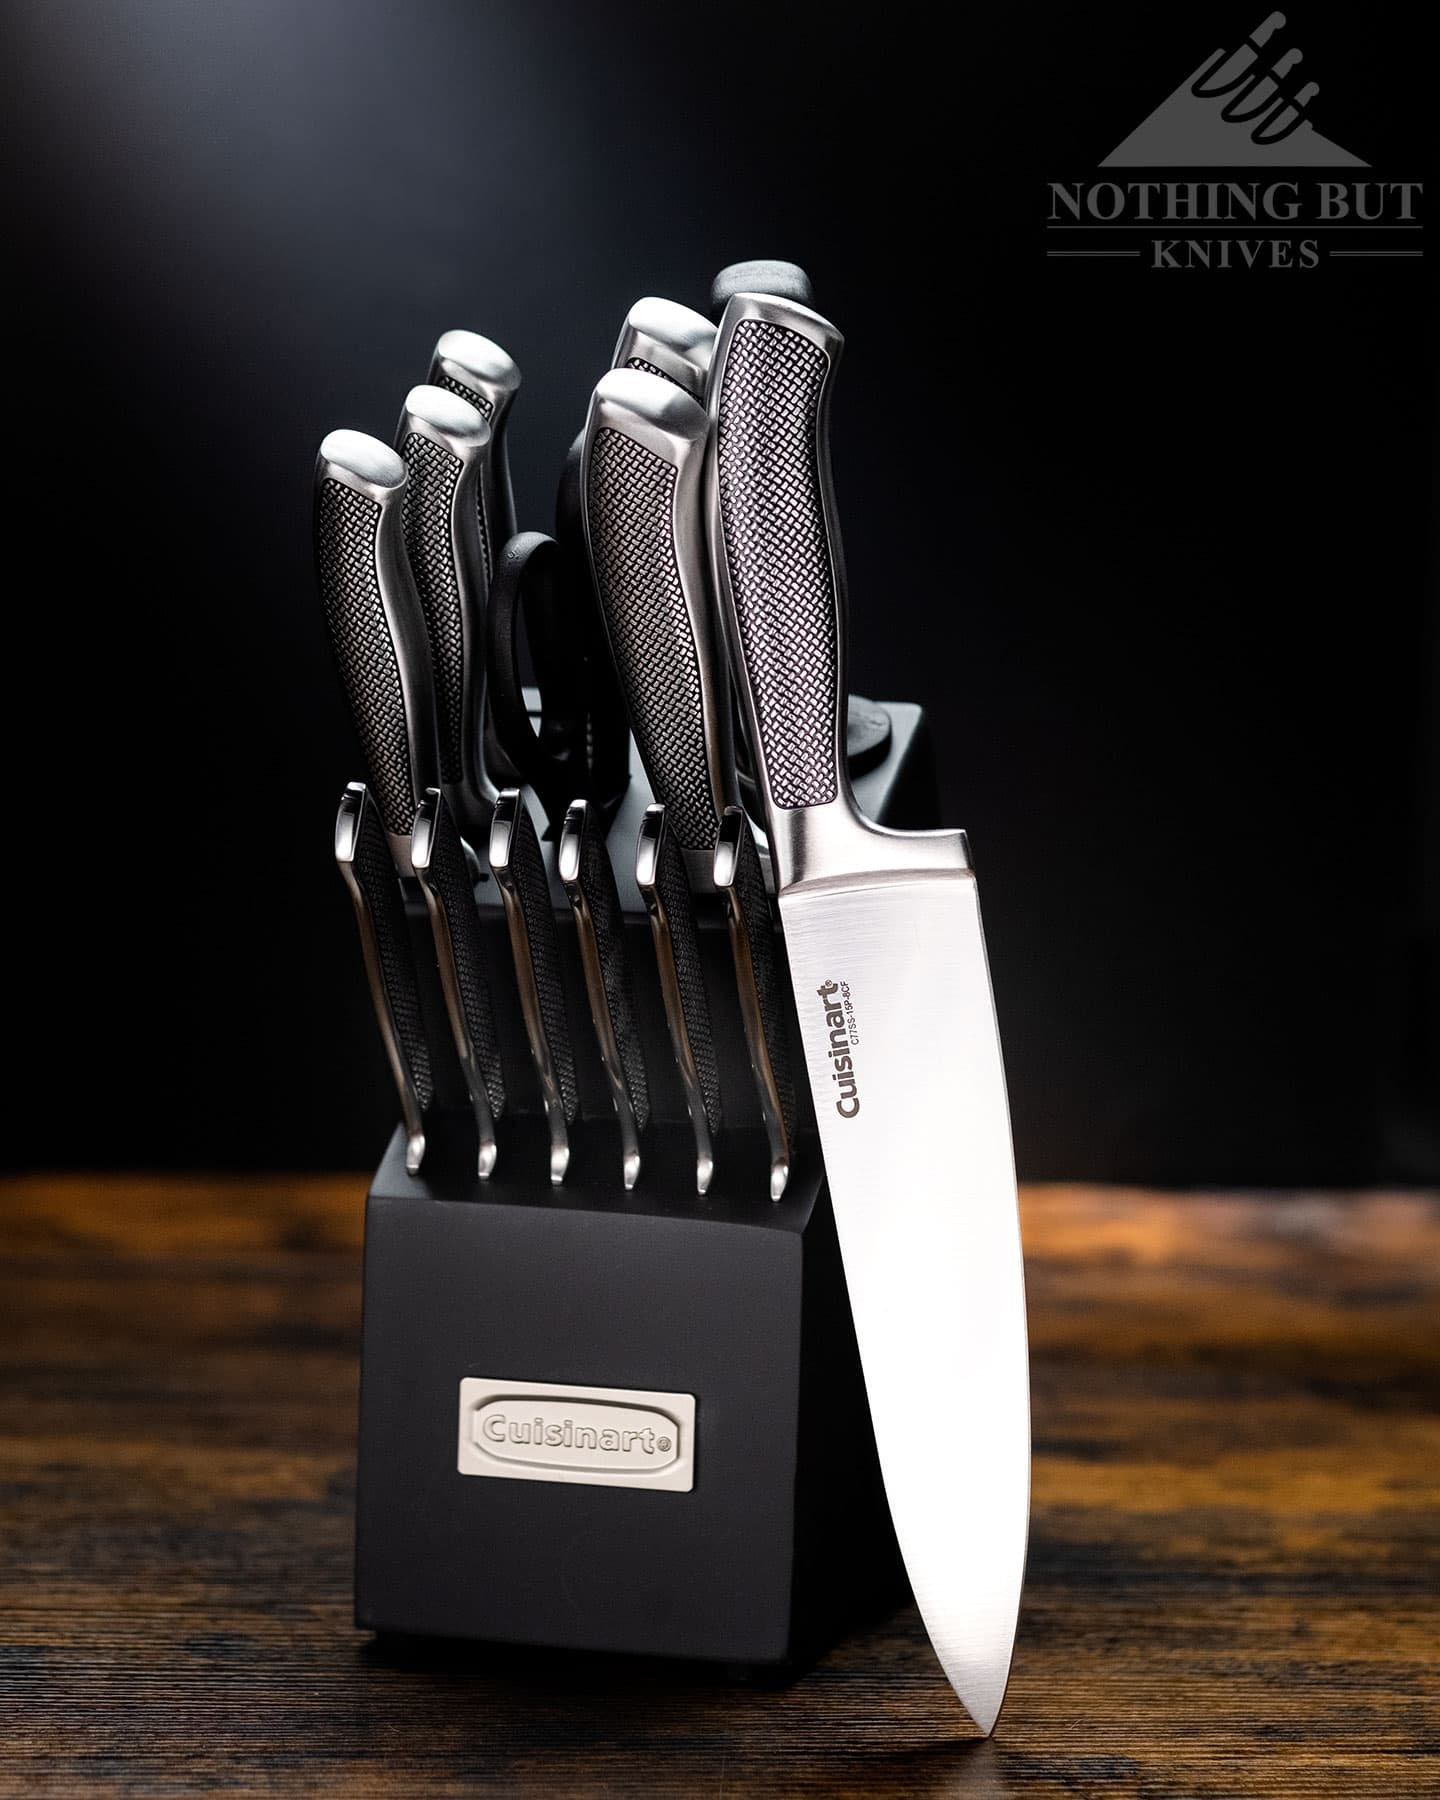 The Cuisinart C77SS-15P knife set is easy to maintain thanks to its stainless-steel blades and handles. 